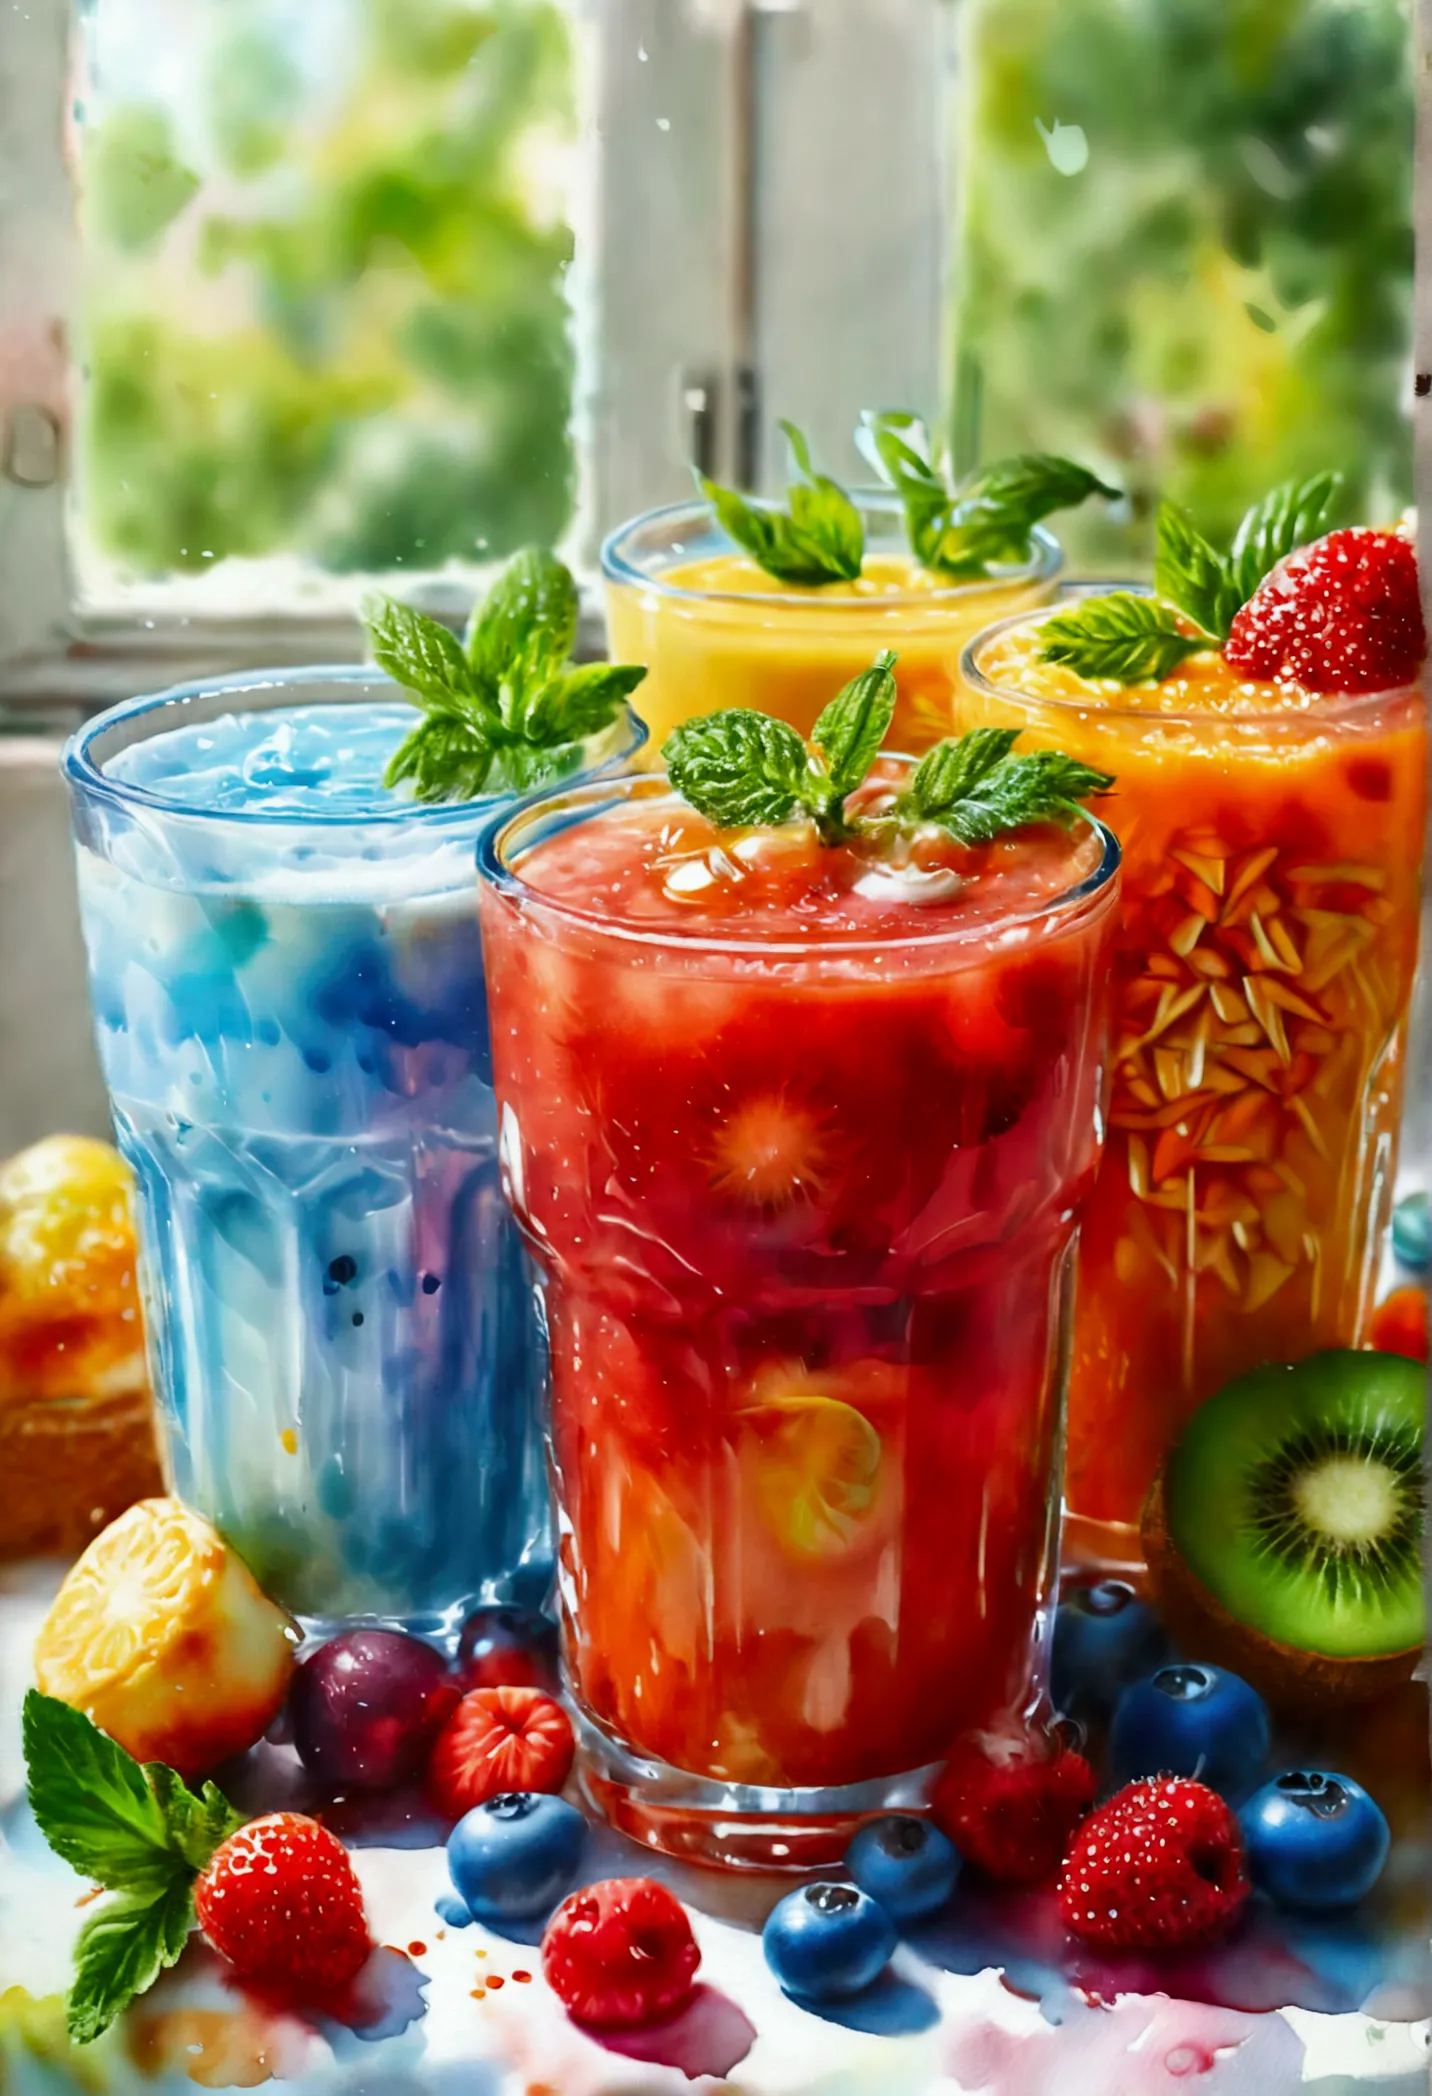 there are many types of colorful healthy drinks served in glasses, the glasses sitting on a surface, juices, smoothie and infuse...